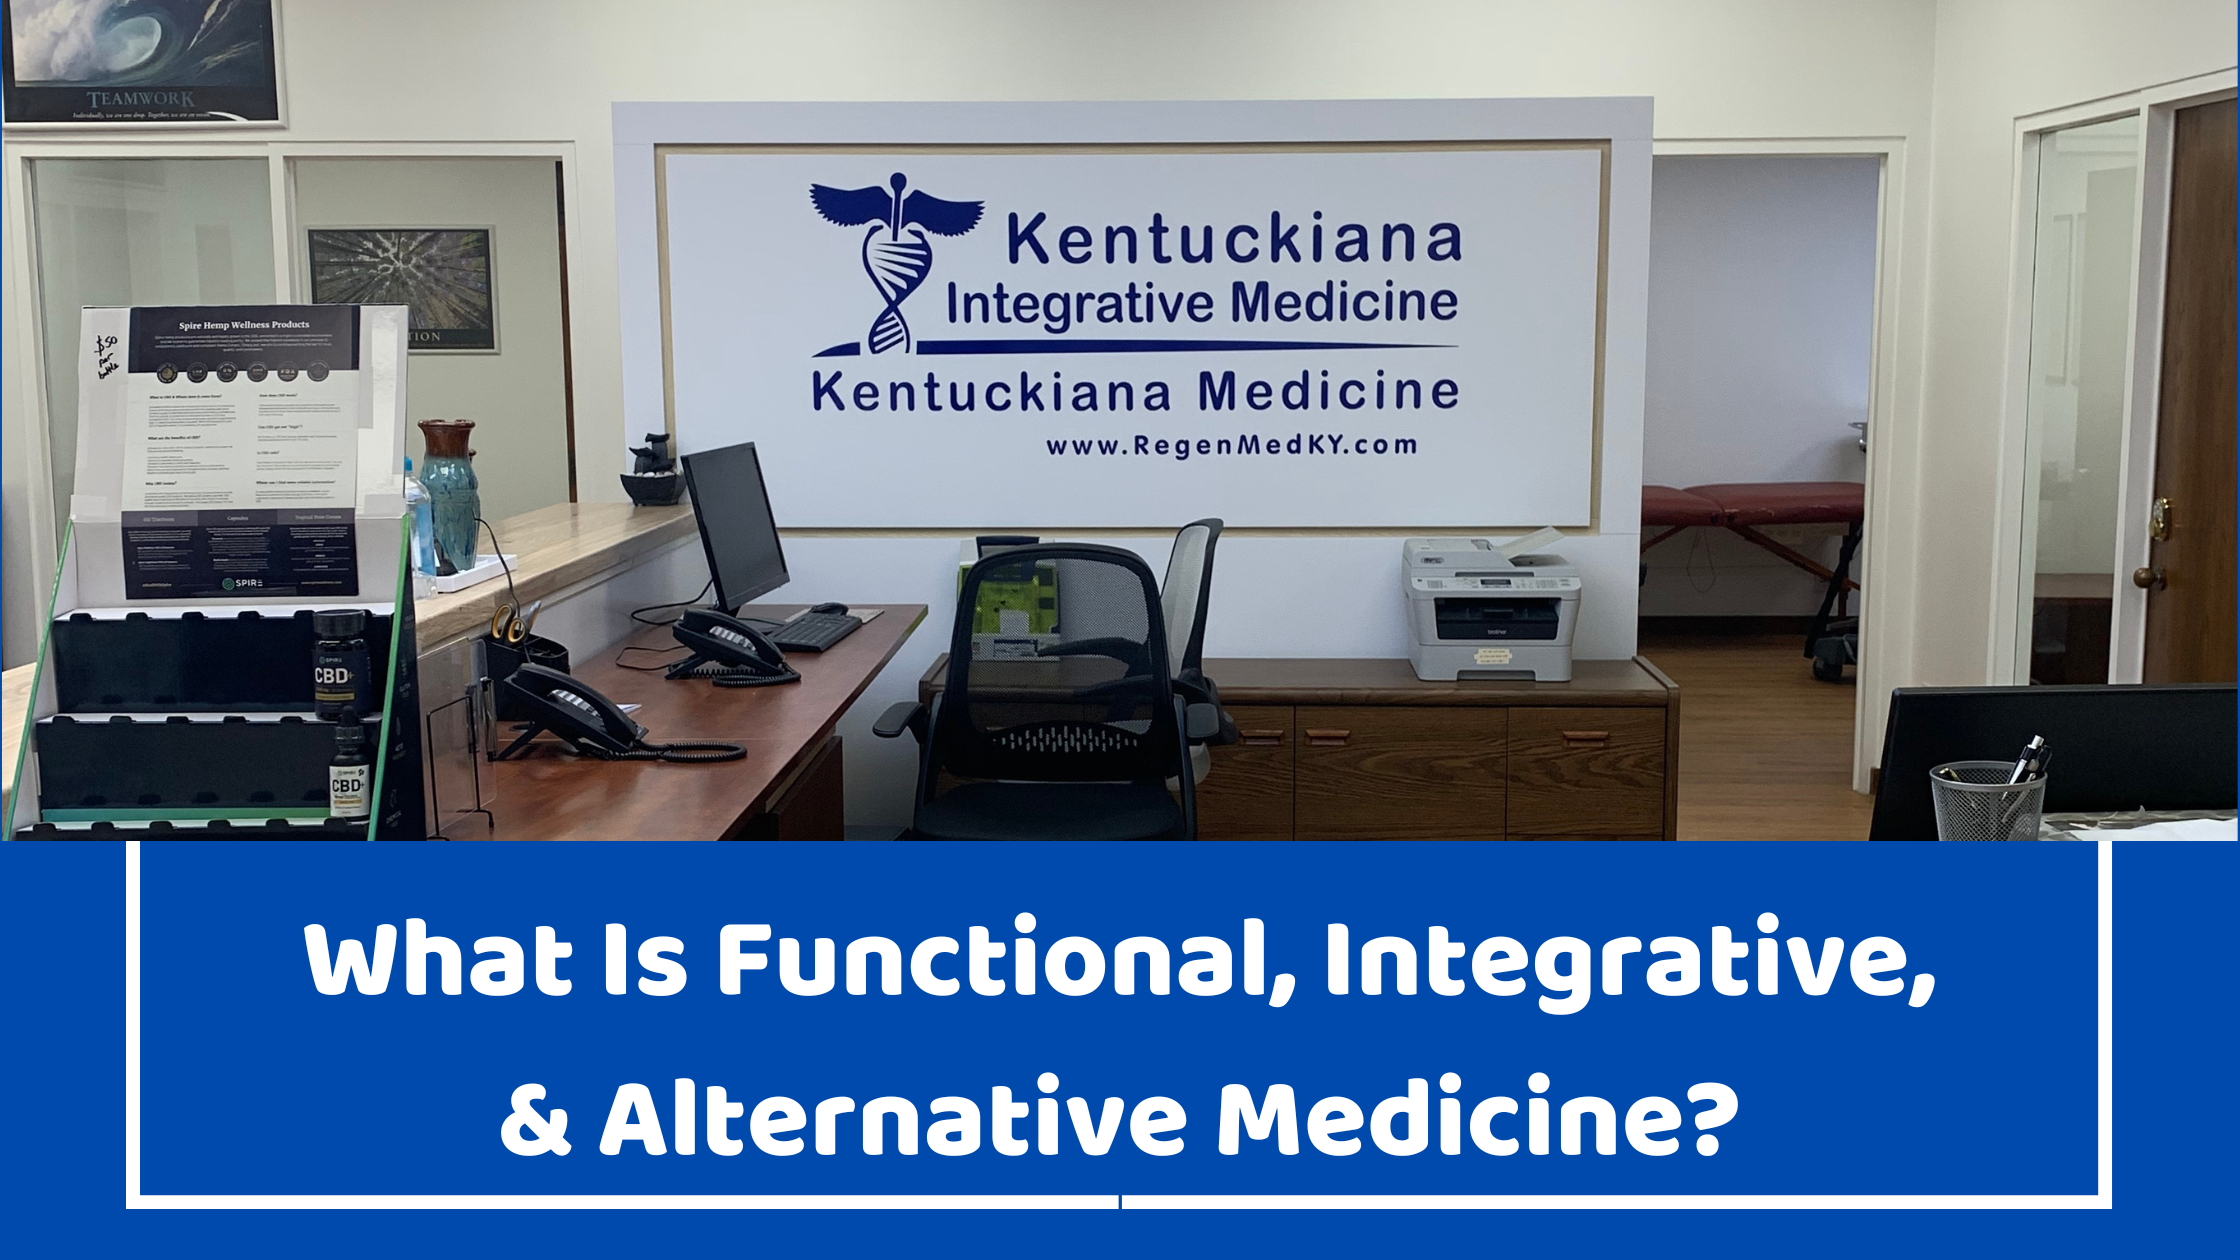 "What is Functional, Integrative, & Alternative Medicine" on background of Reception area at Kentuckiana Integrative Medicine Local Louisville Jeffersonville Office